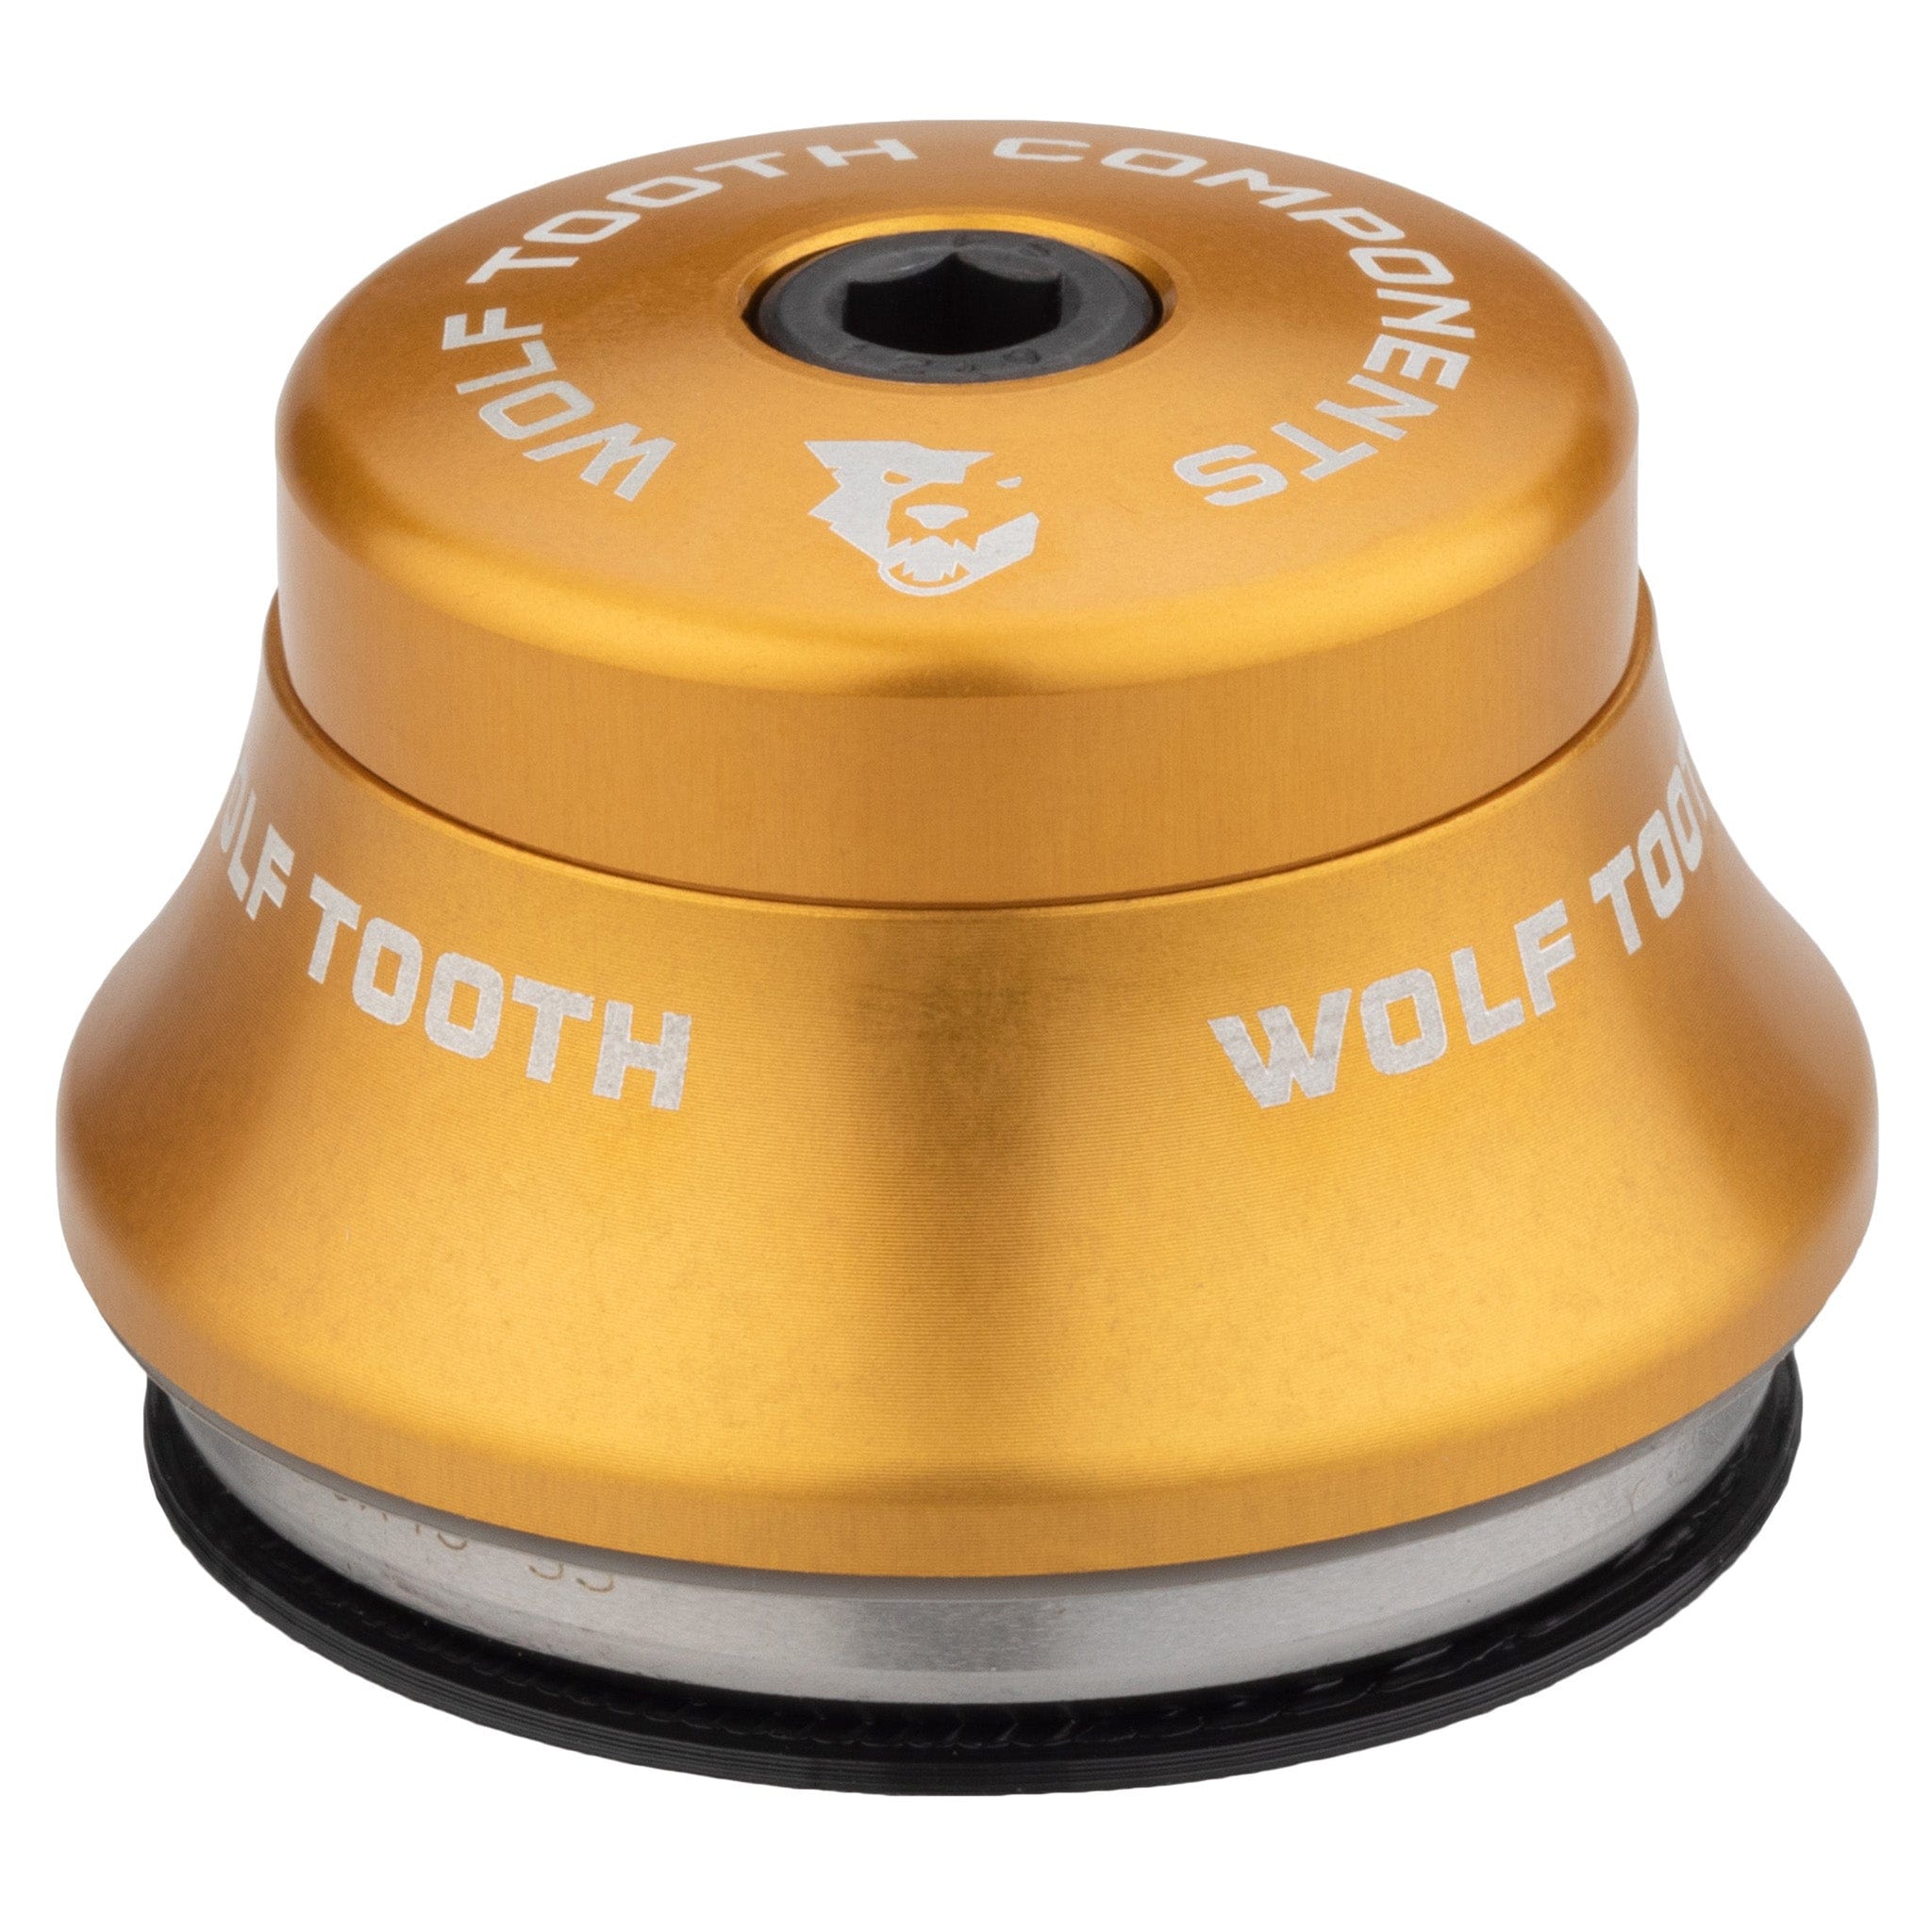 Wolf Tooth Premium IS Headsets - Integrated Standard